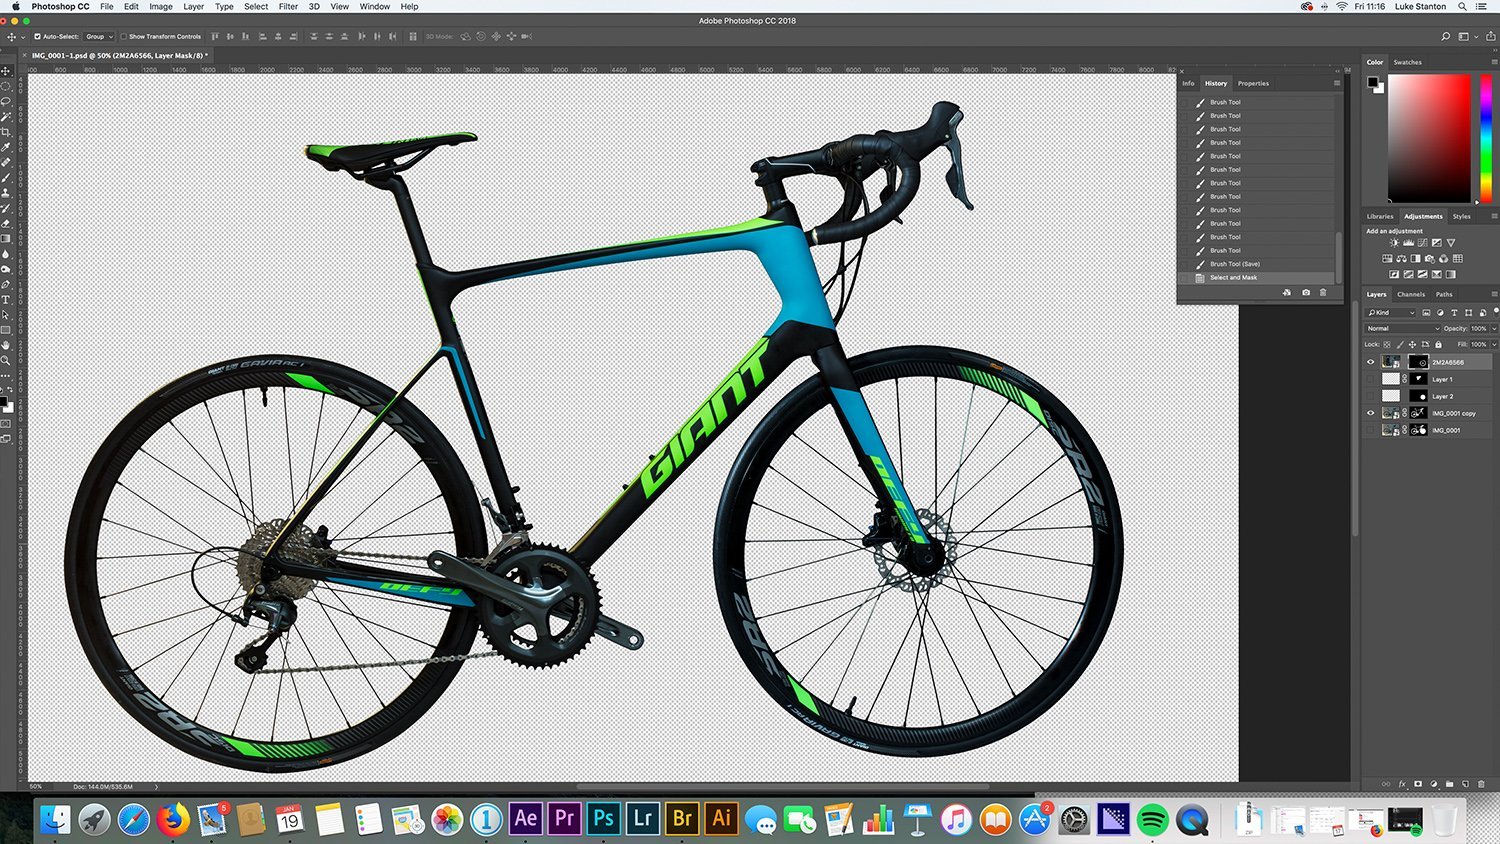 Post-production for Giant Defy Bike product photography (3)